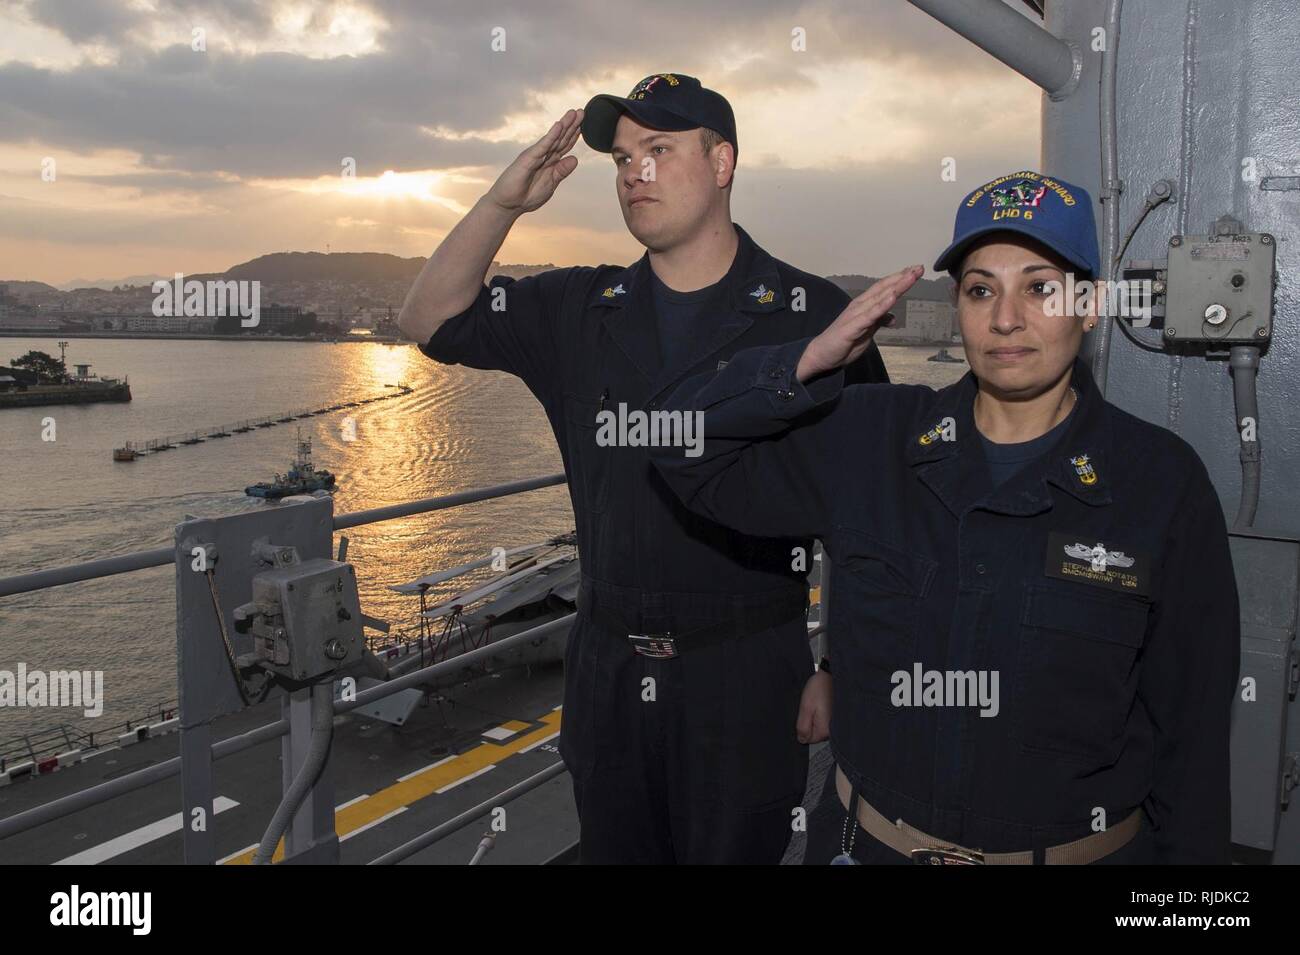 SASEBO, Japan (Jan. 23, 2018) Master Chief Quartermaster Stephanie Kortatis, right, from Sayreville, N.J., and Quartermaster 1st Class Matthew Lenerville, from Richardton, N.D., render honors during morning colors aboard the amphibious assault ship USS Bonhomme Richard (LHD 6) prior to the ship’s departure from Sasebo, Japan. Bonhomme Richard is underway conducting a Readiness for Sea assessment ahead of a regularly scheduled patrol in the Indo-Asia-Pacific region. Stock Photo